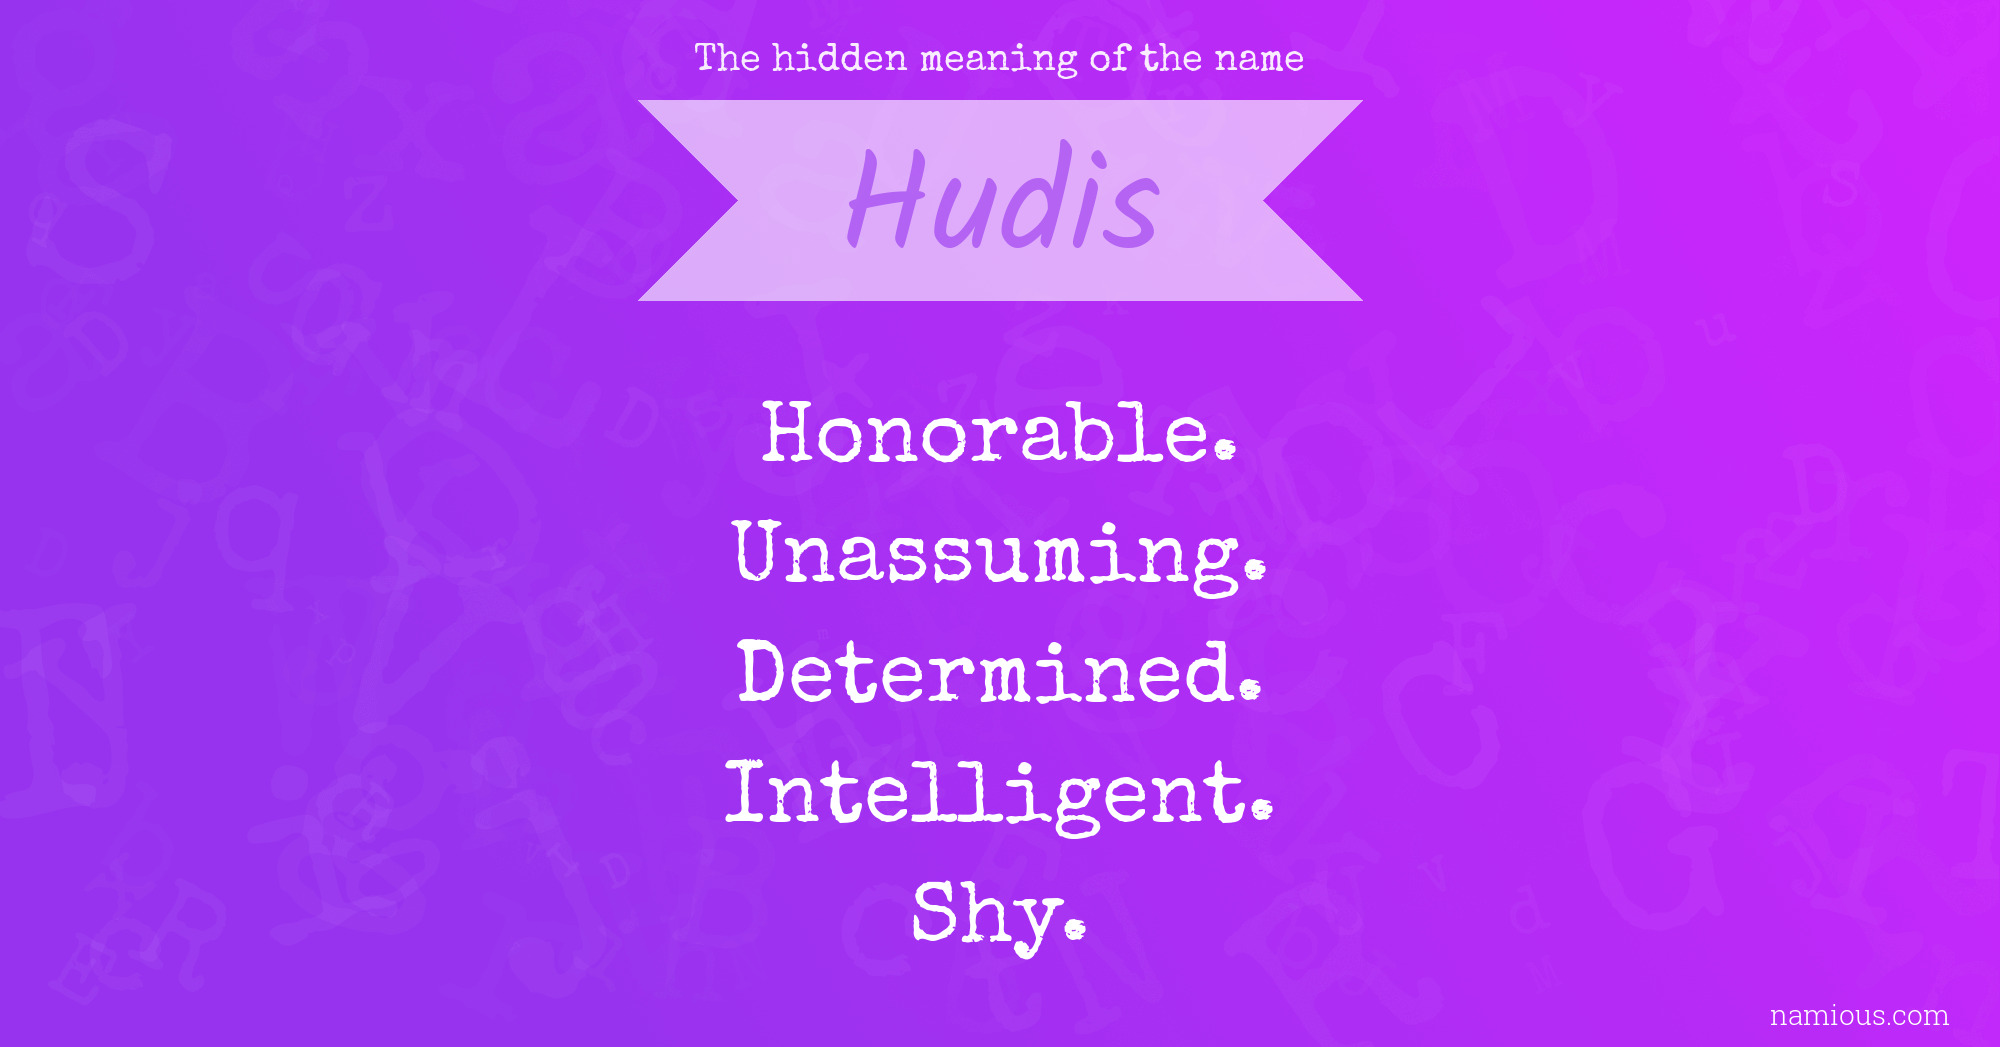 The hidden meaning of the name Hudis